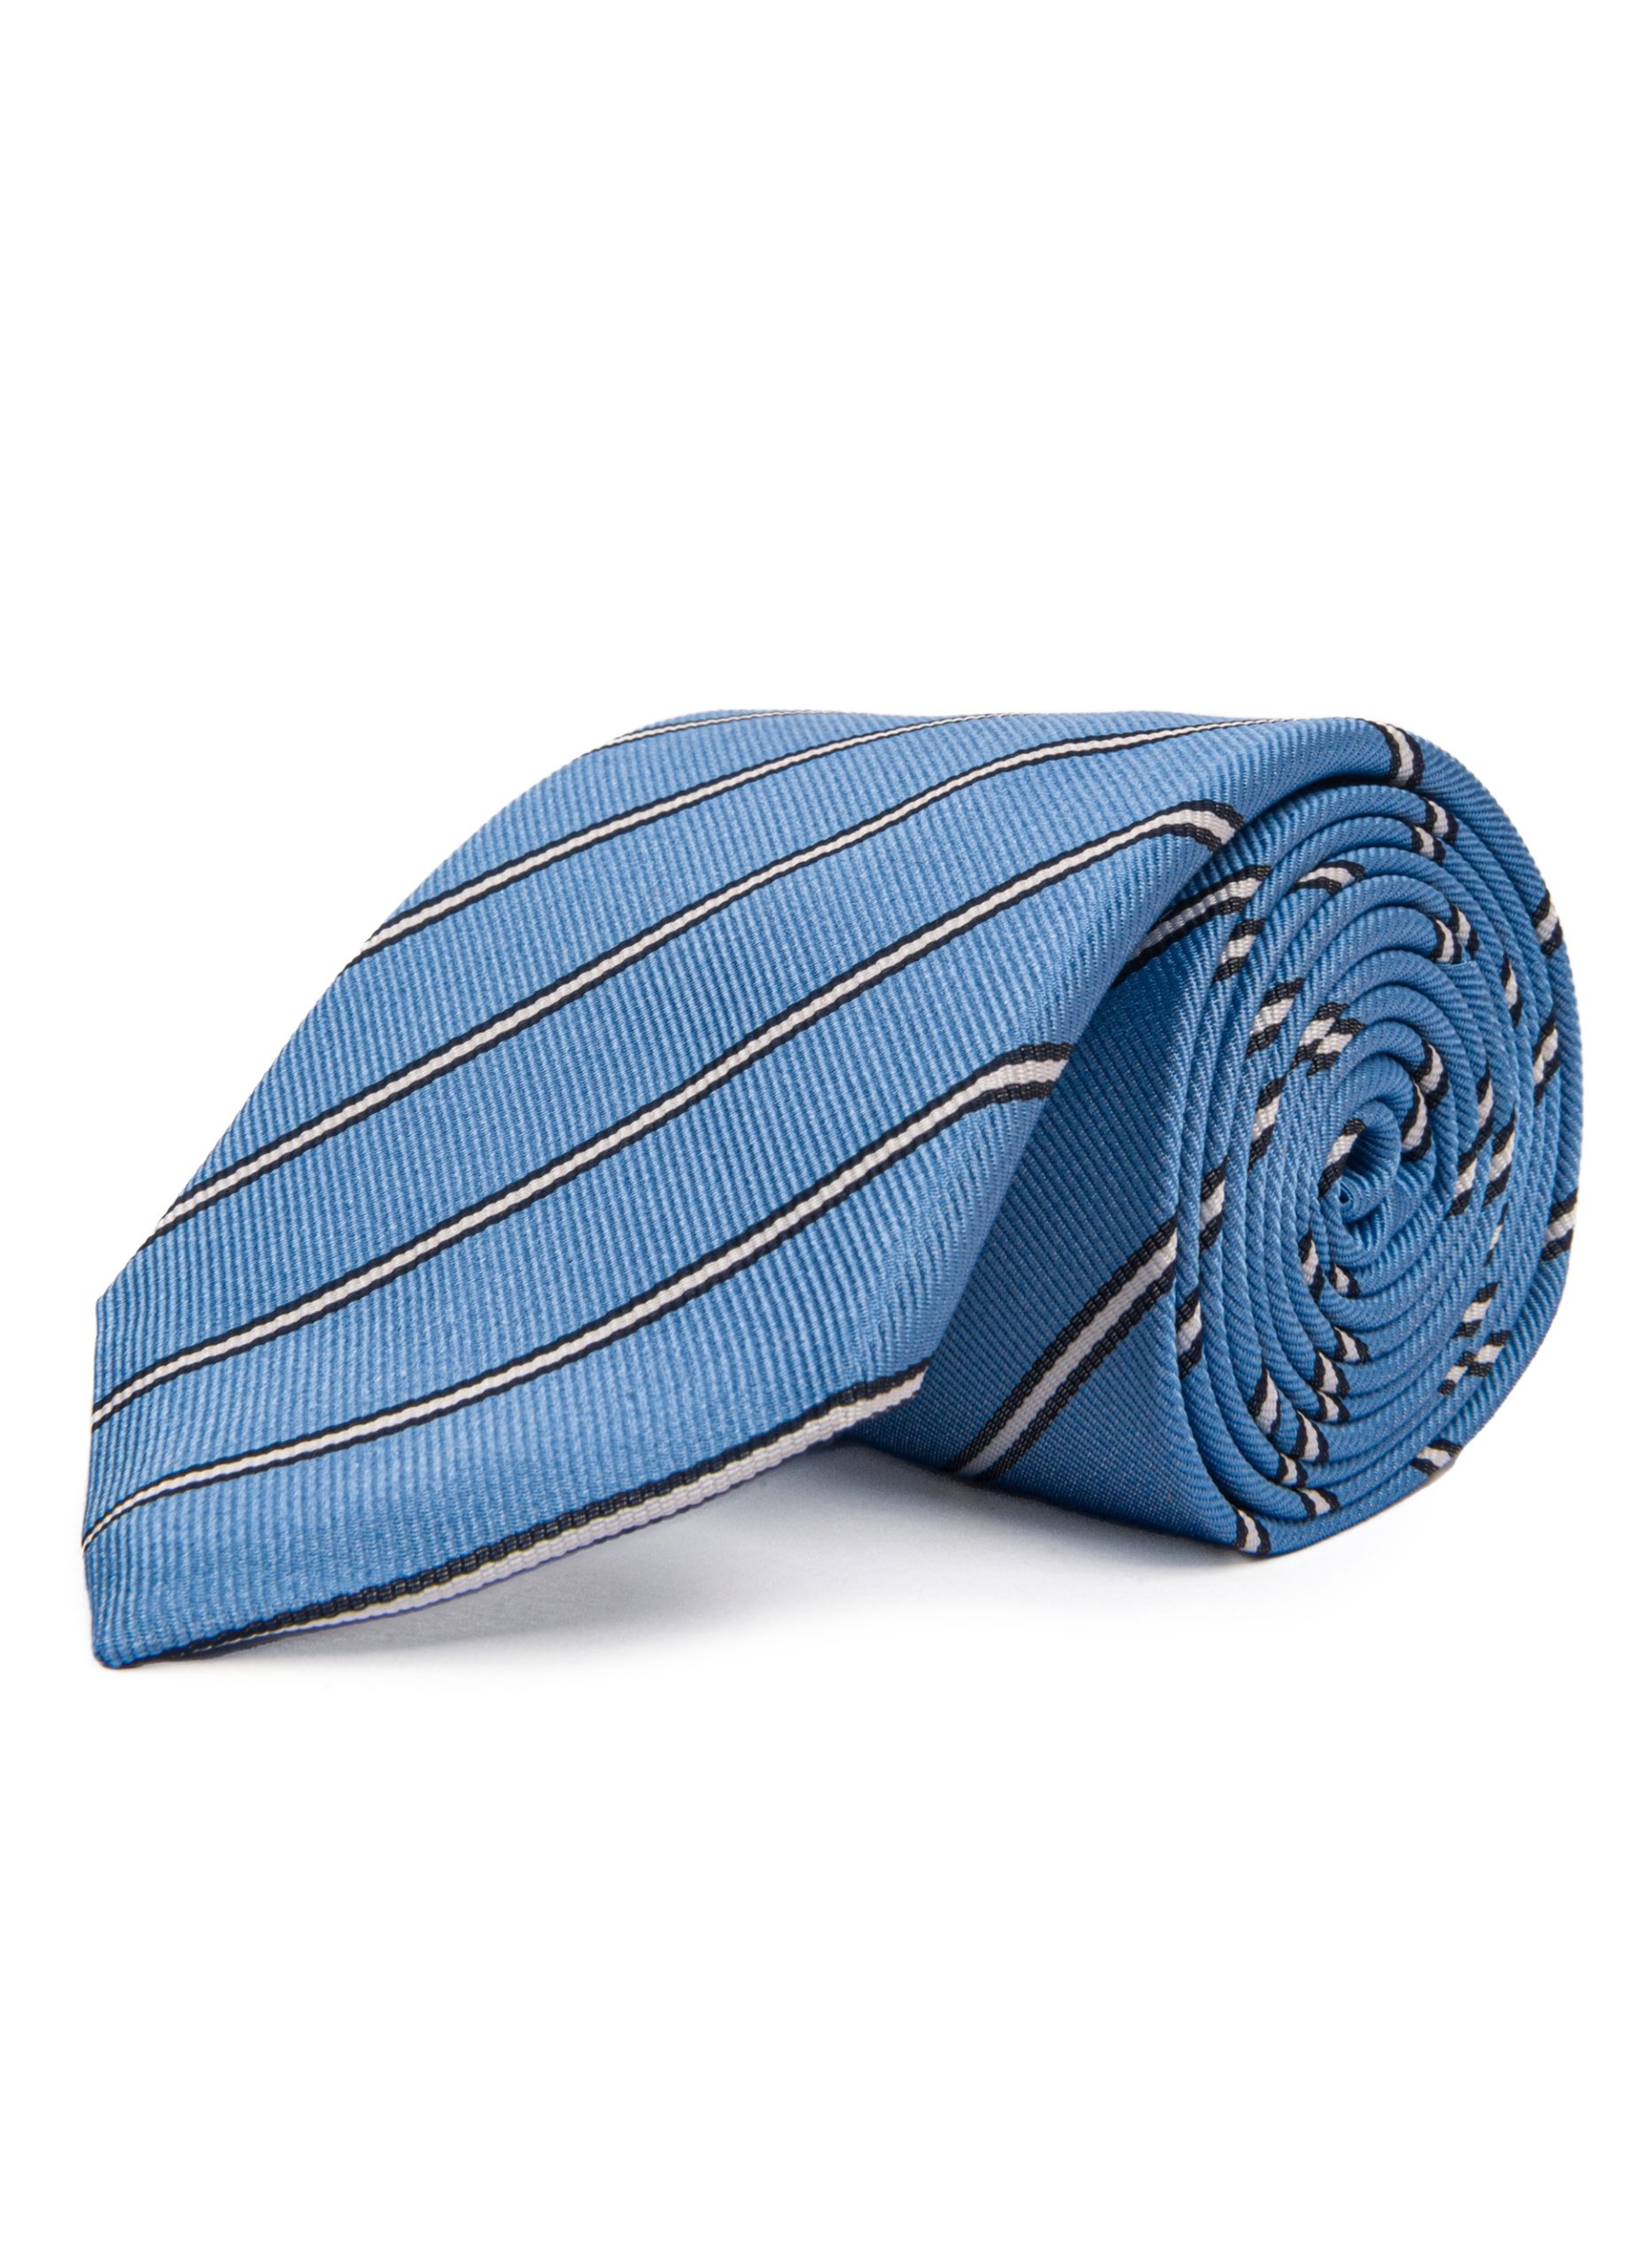 Roderick Charles London sky blue and navy stripped tie